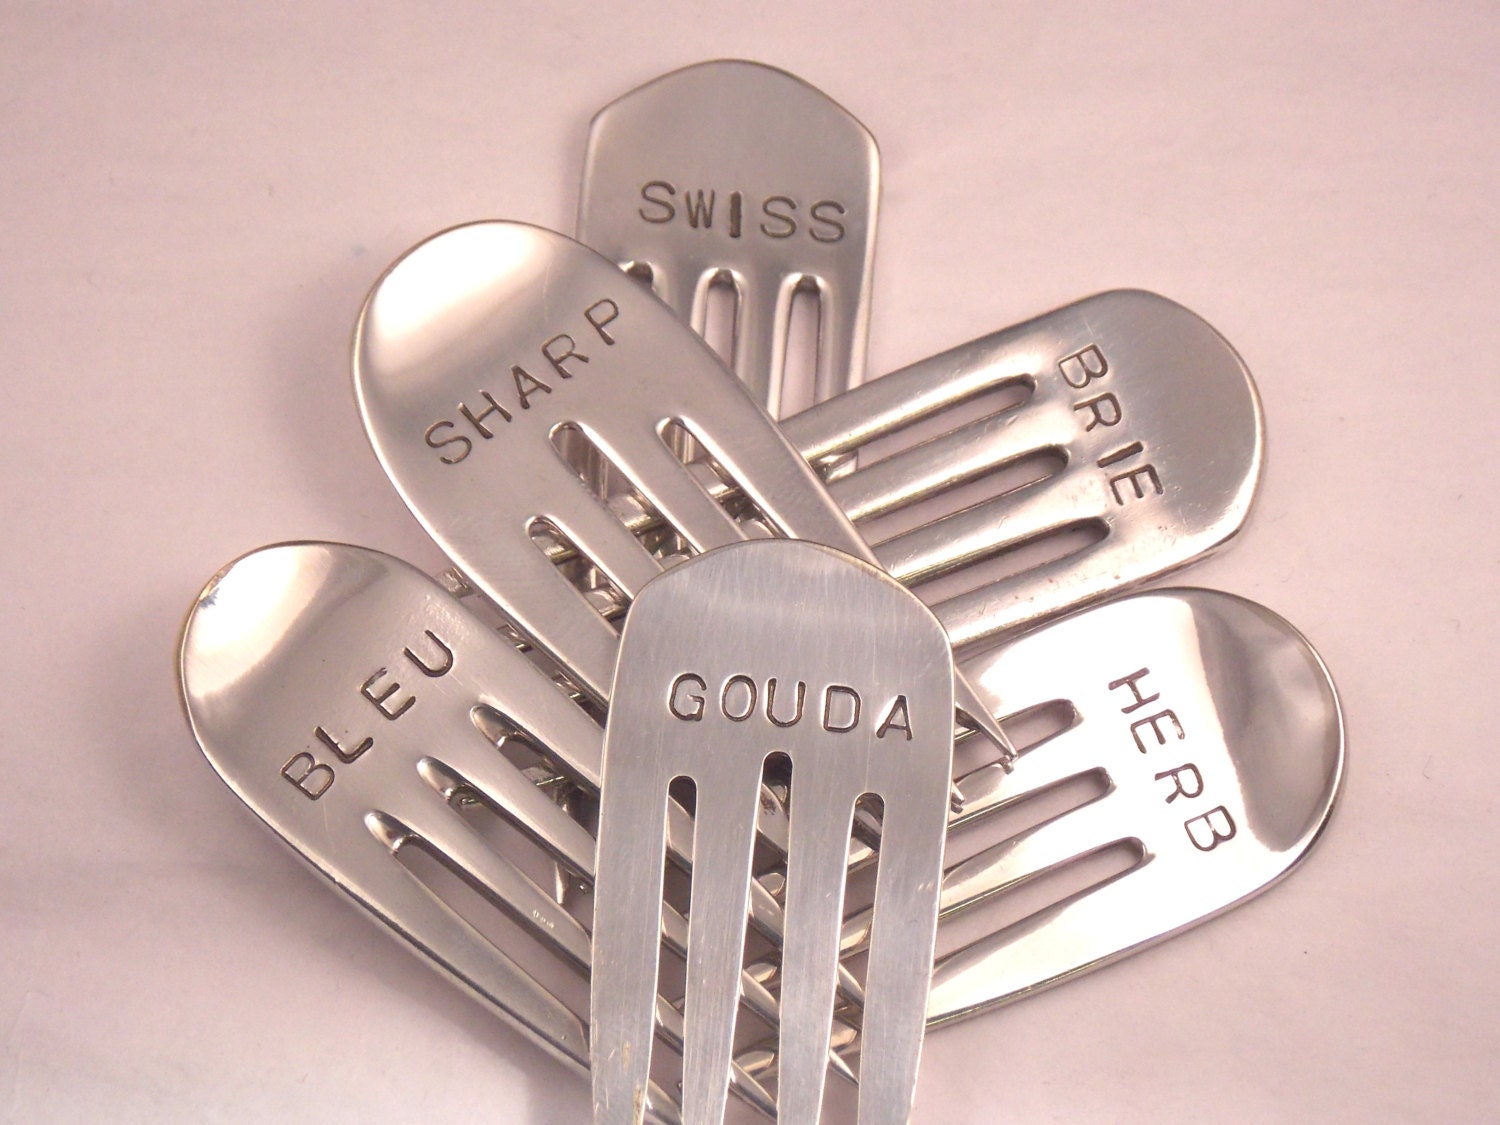 CHEESE MARKERS - 6 Pc Set, Hand Stamped Upcycled Recycled Vintage Silverplate Fork Tines, Eco Friendly, Rustic, Vineyard Styl